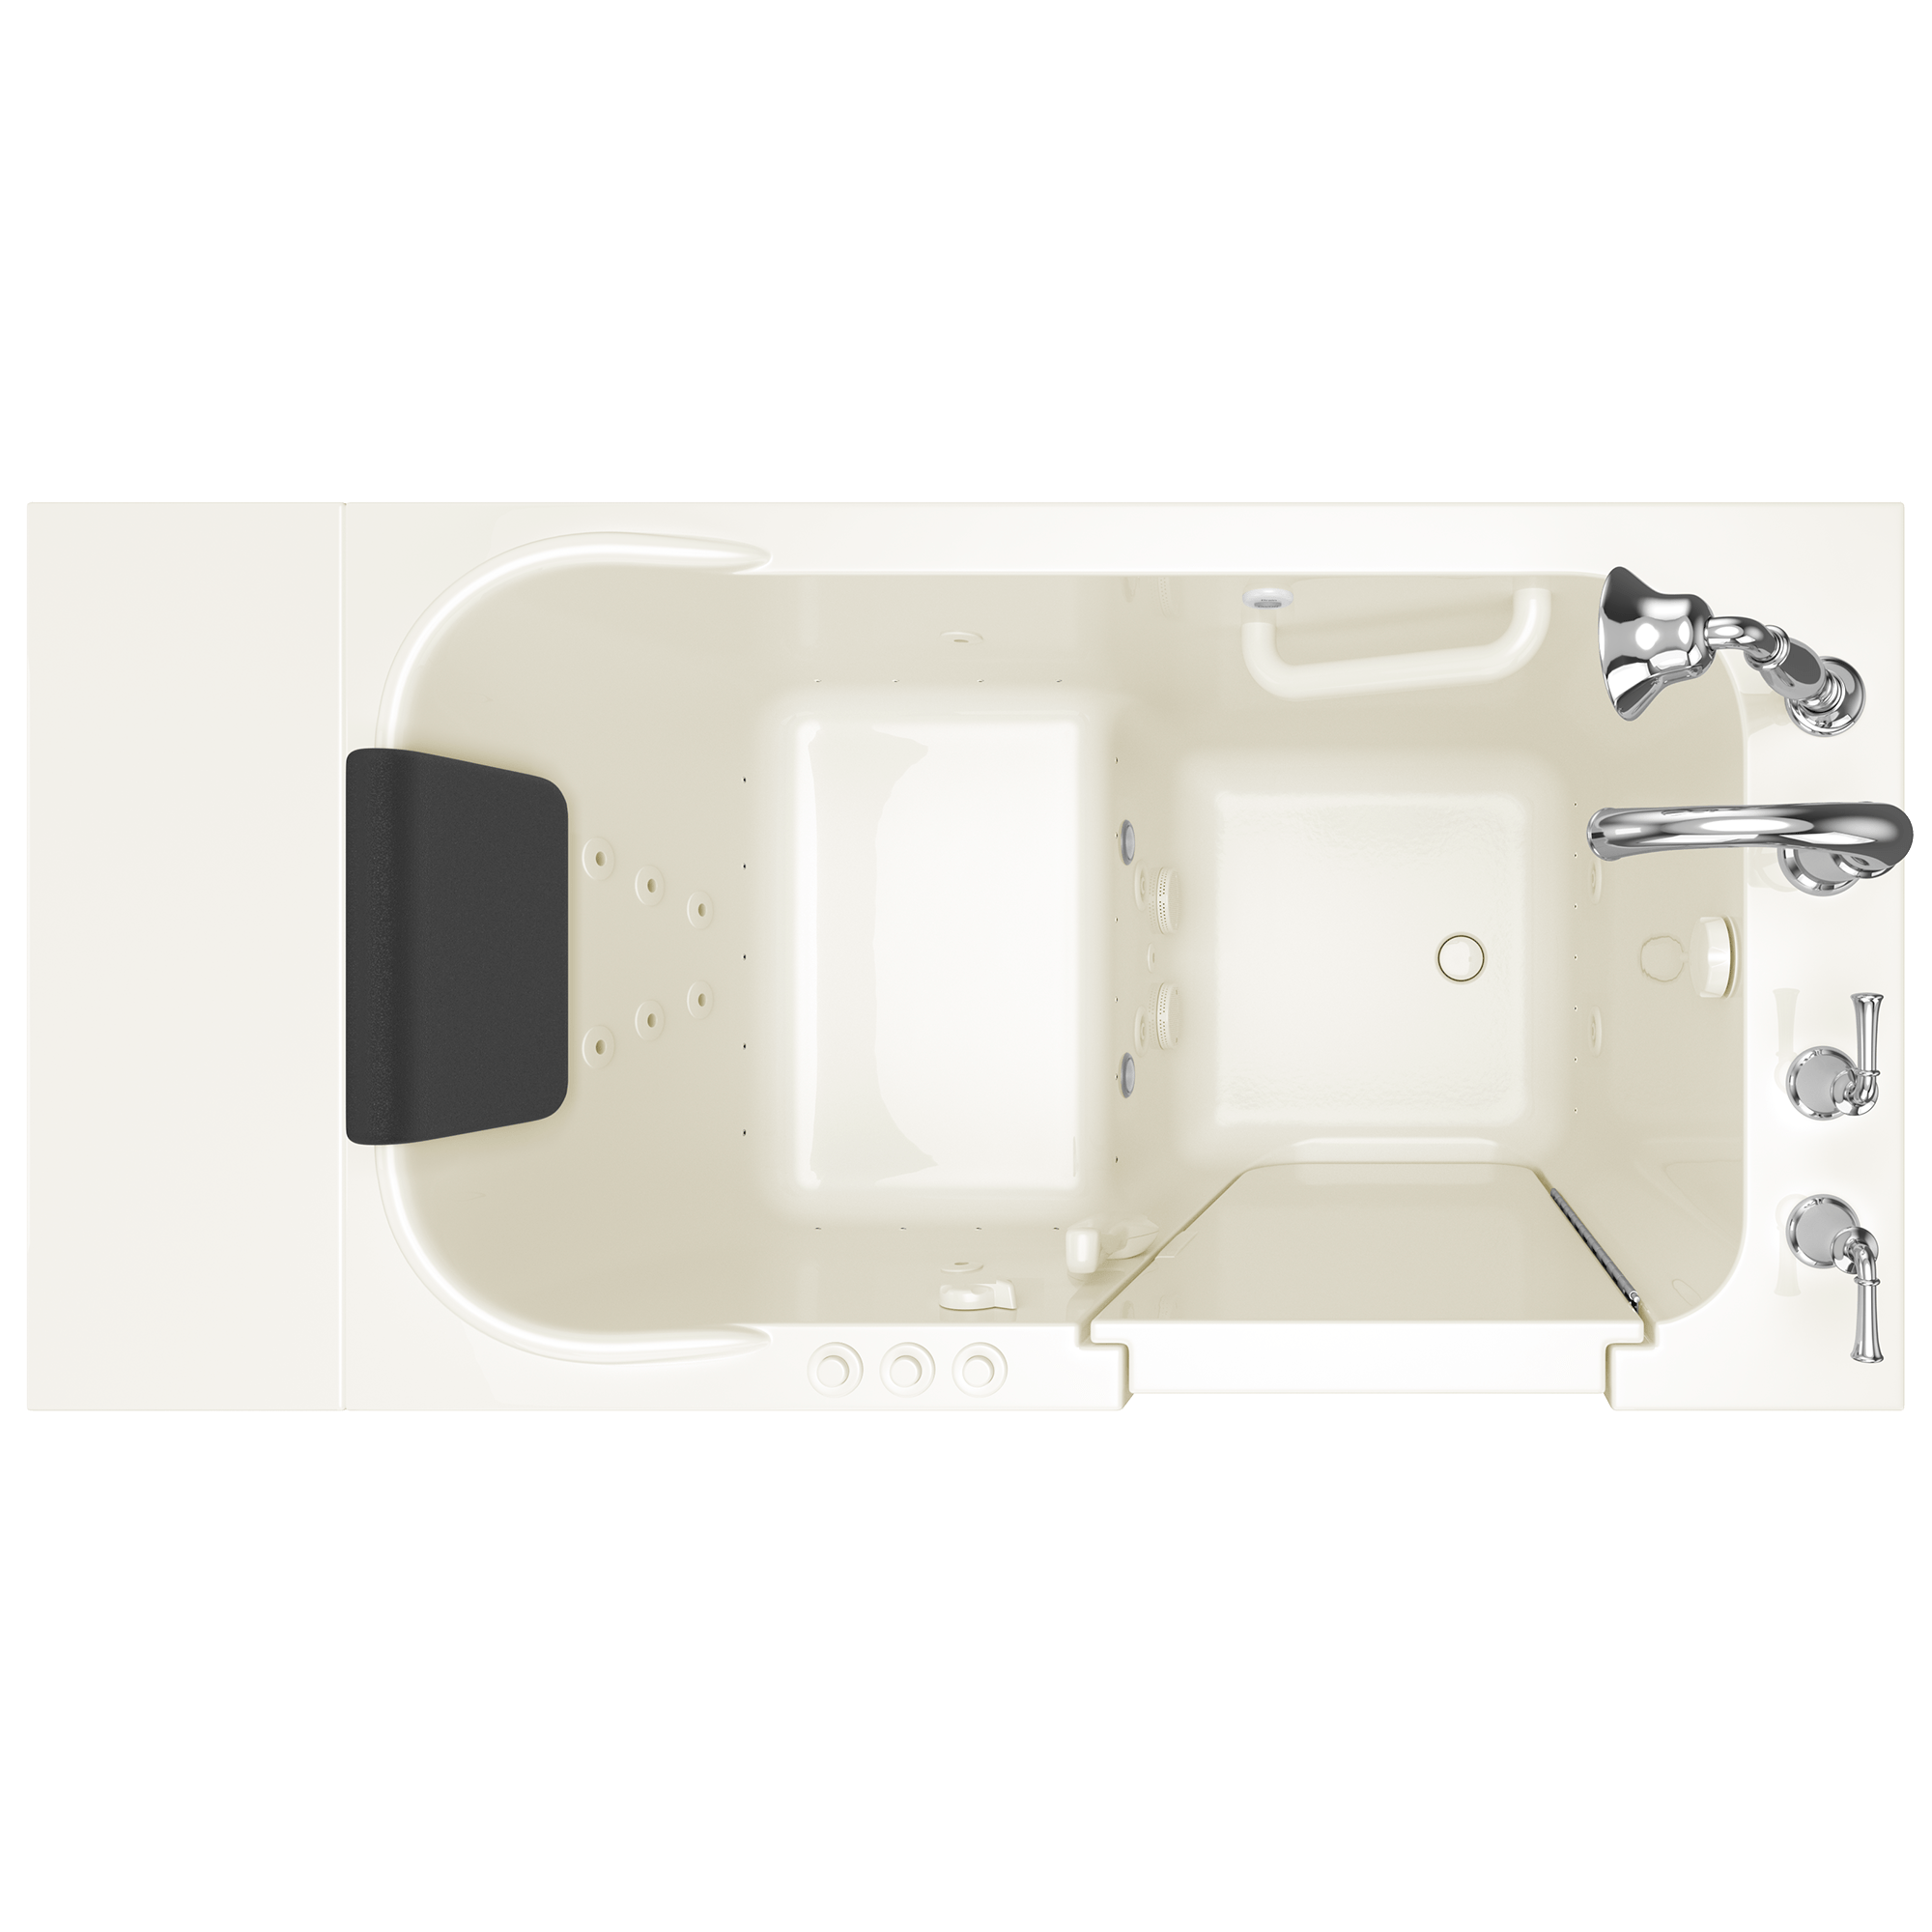 Gelcoat Premium Series 48x28 Inch Walk In Bathtub with Dual Air Massage and Jet Massage System   Right Hand Door and Drain ST BISCUIT